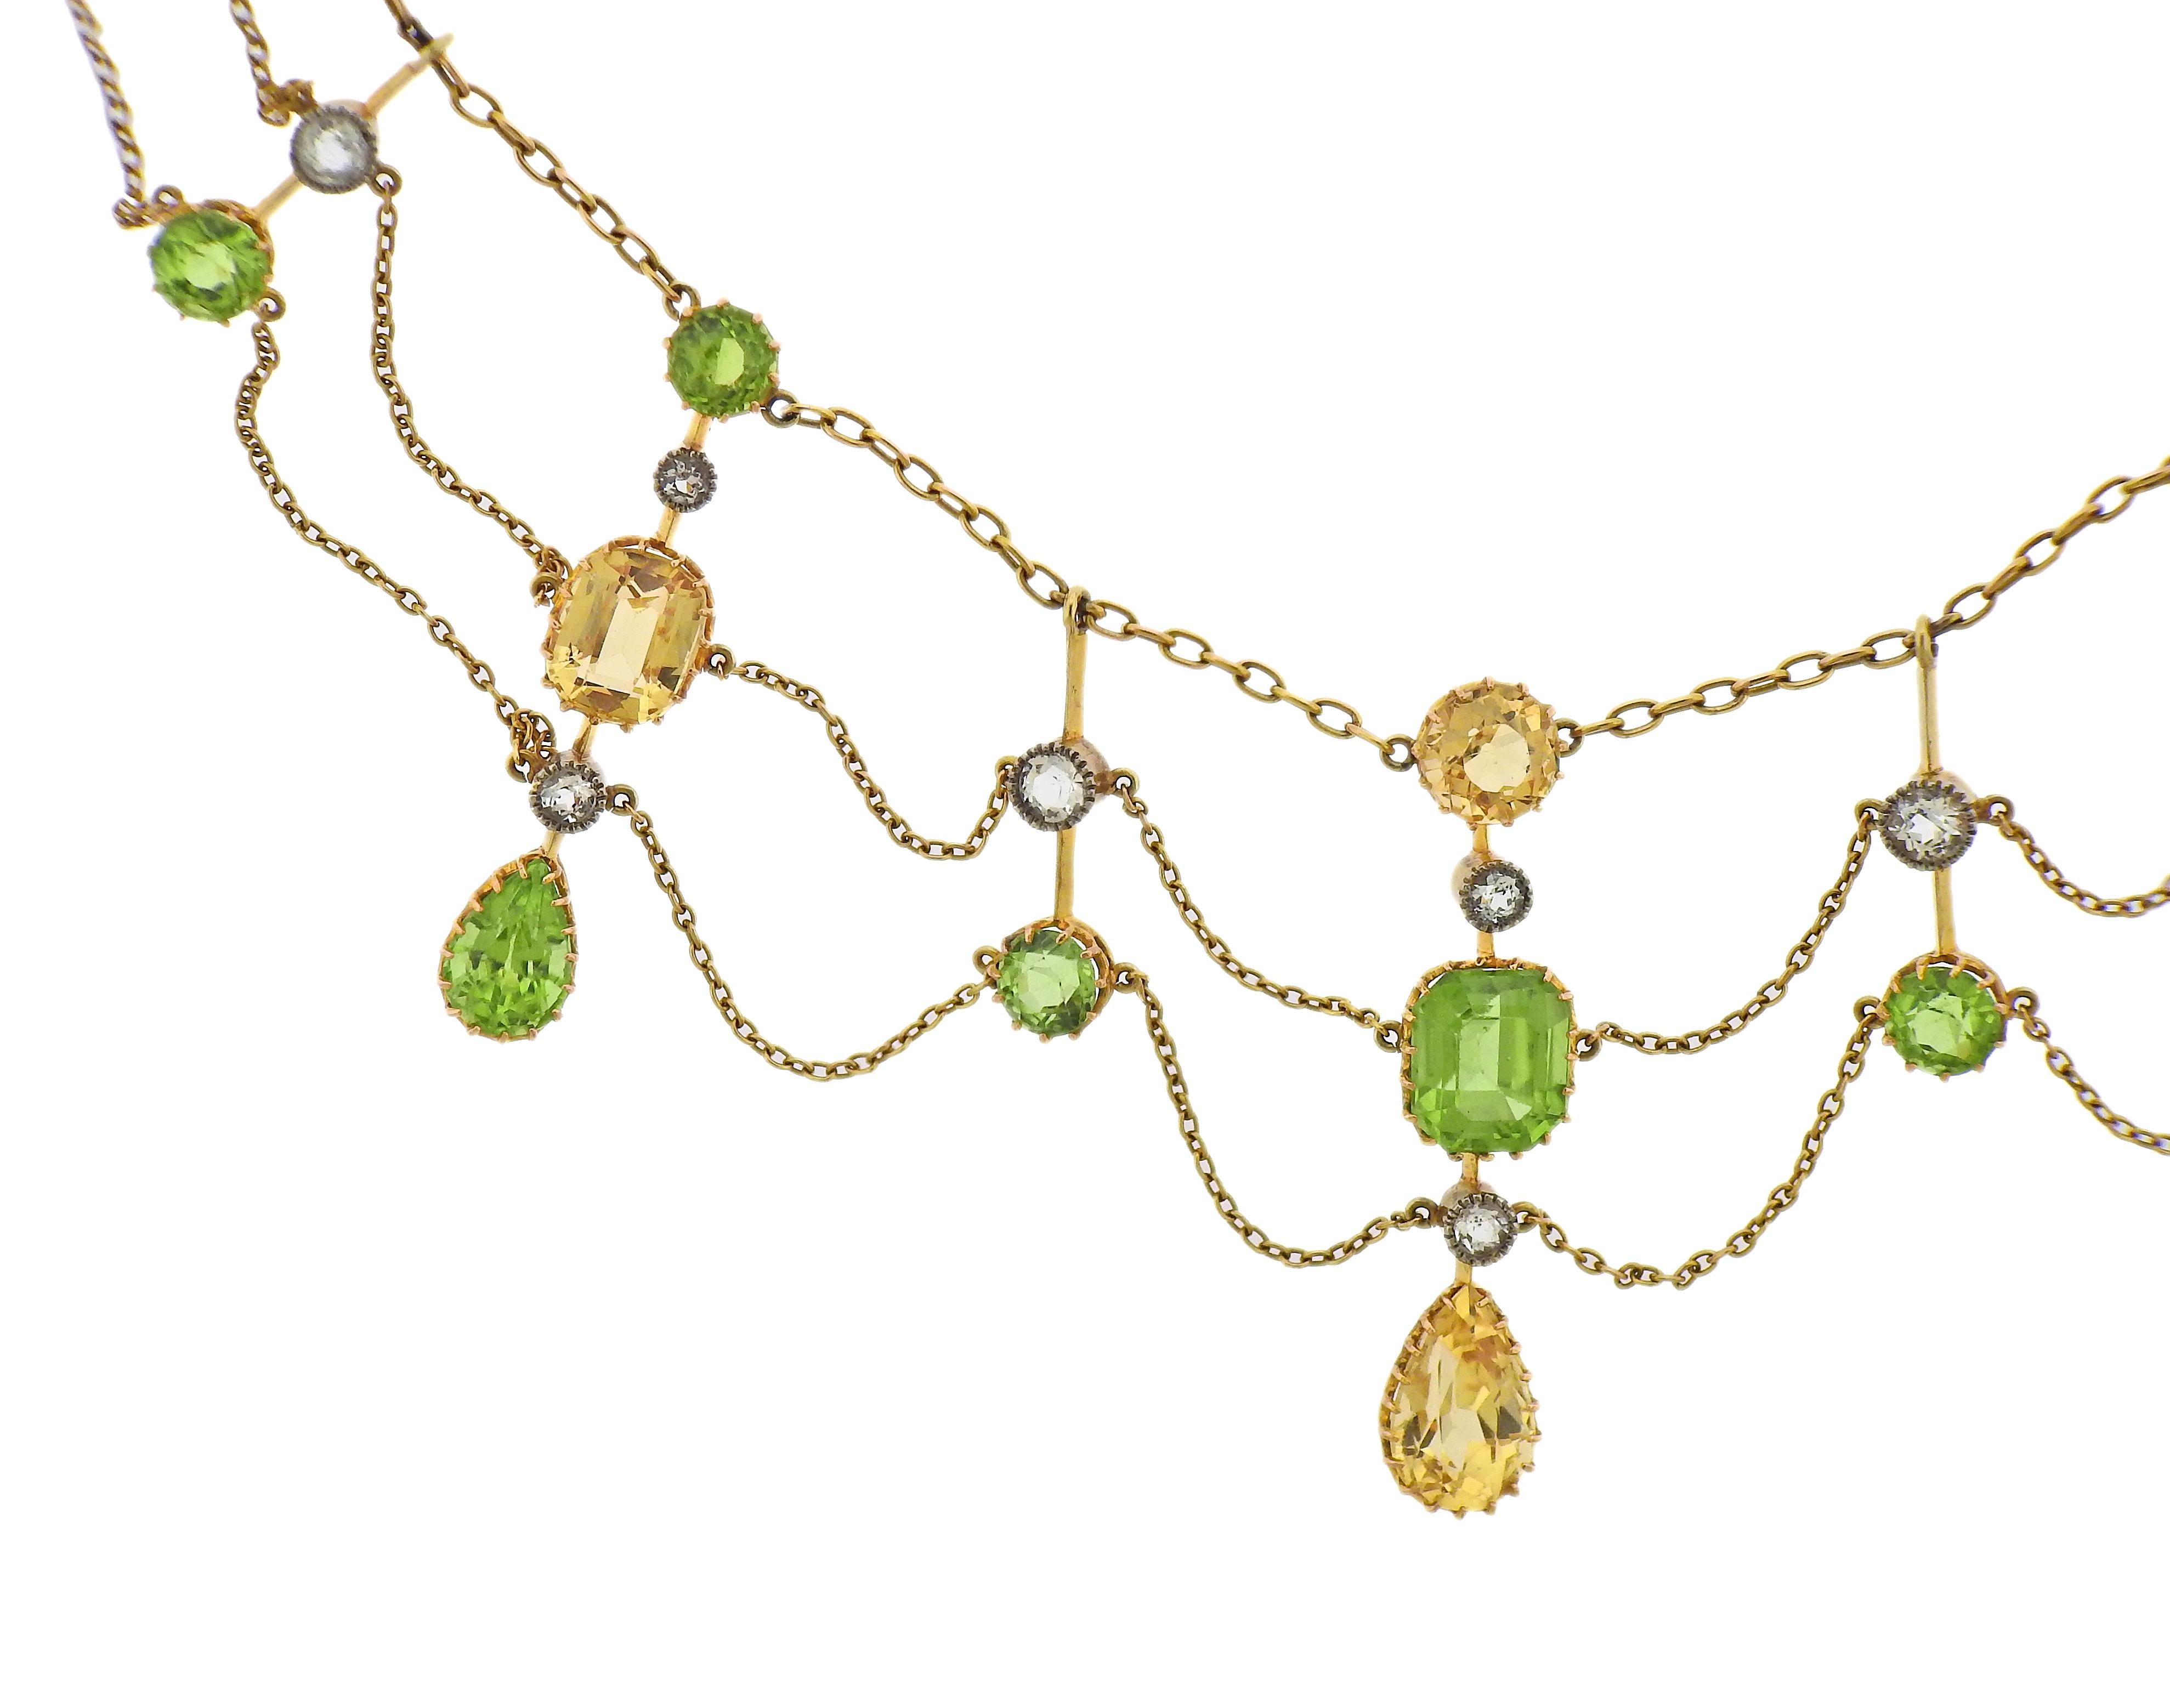 Antique 14k gold collier necklace, set with paste, citrines and peridots. Necklace is 15.25